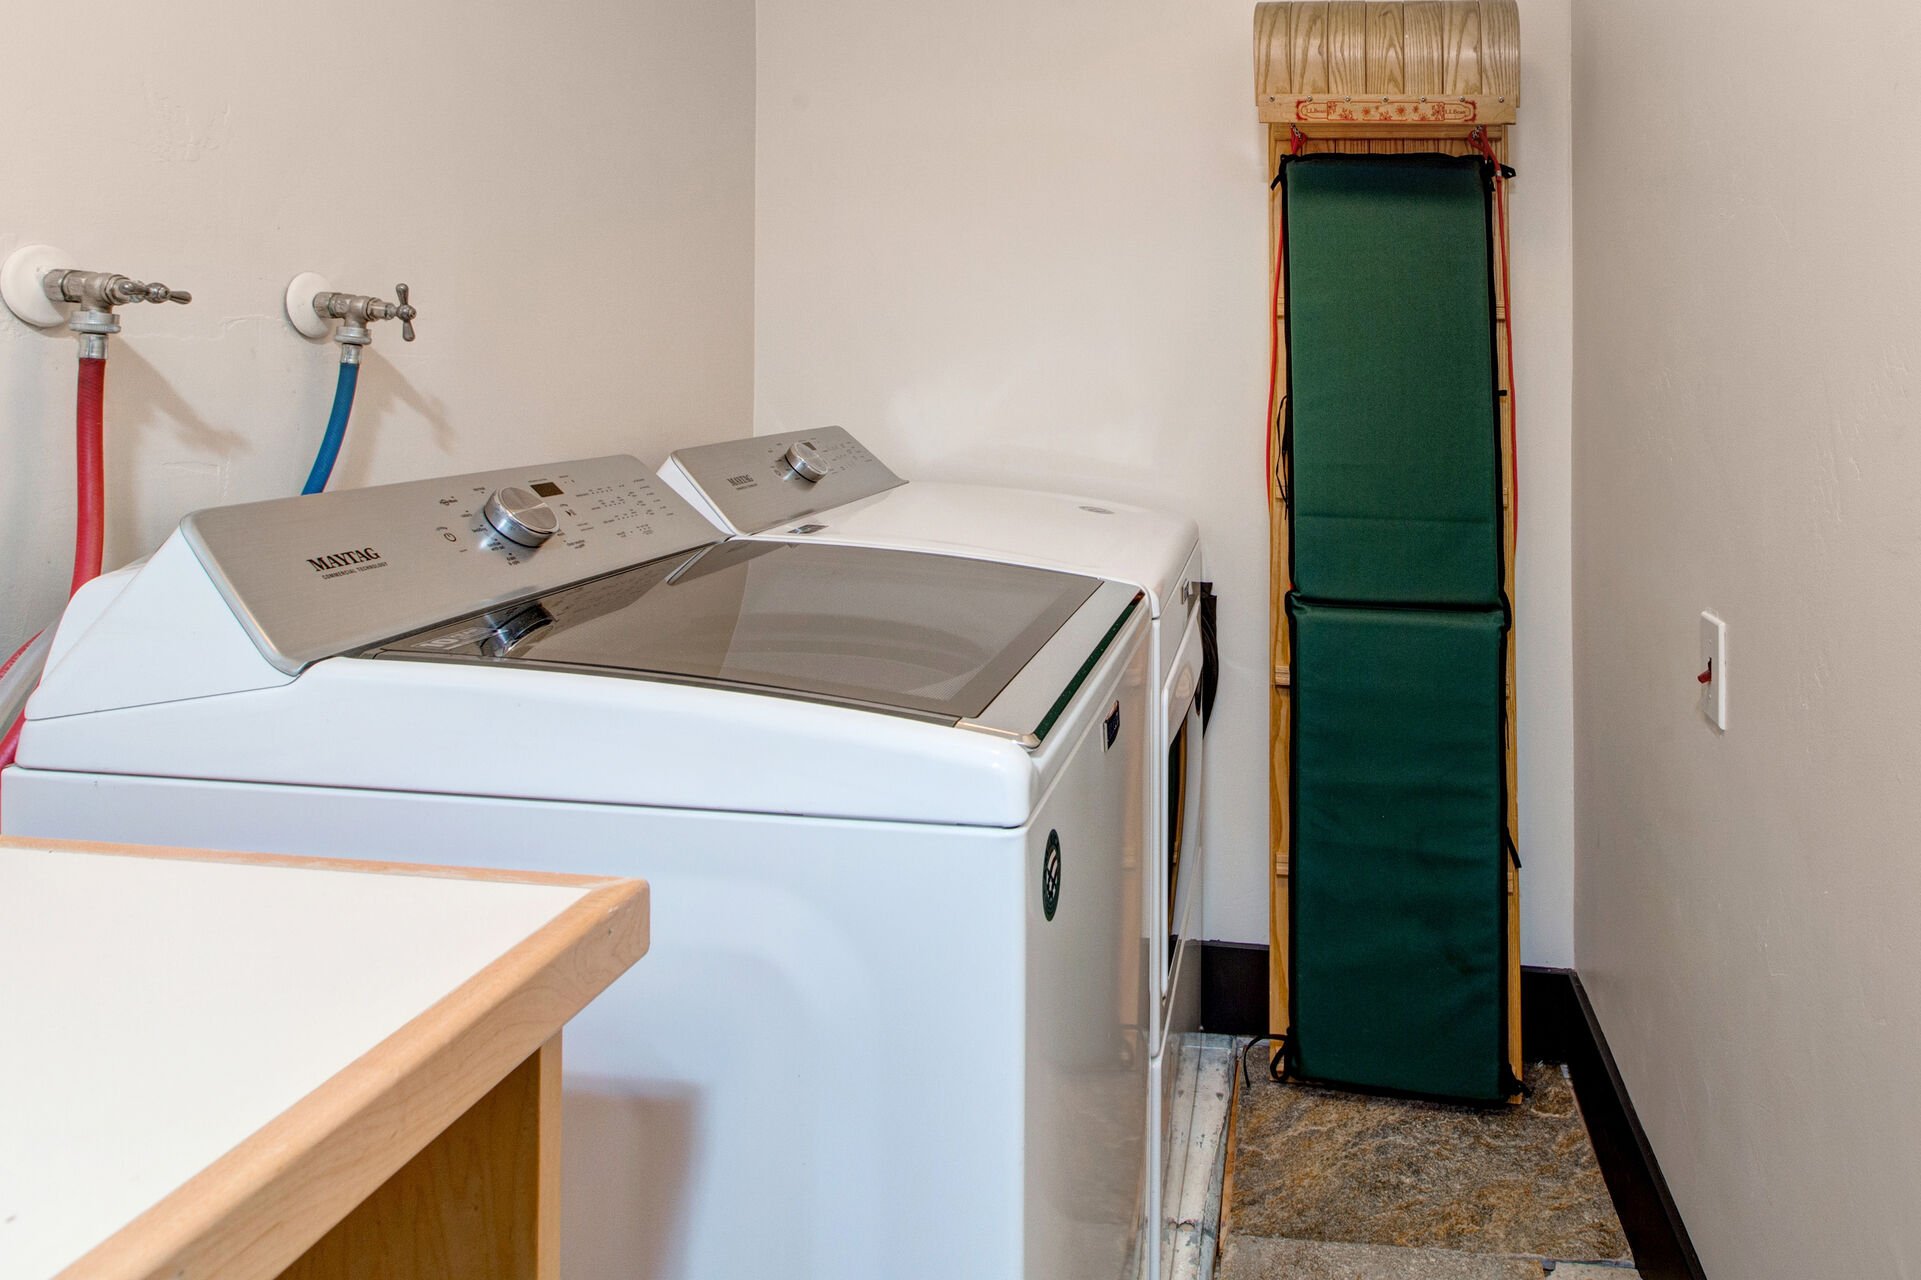 Full sized laundry room with utility sink and washer and dryer units